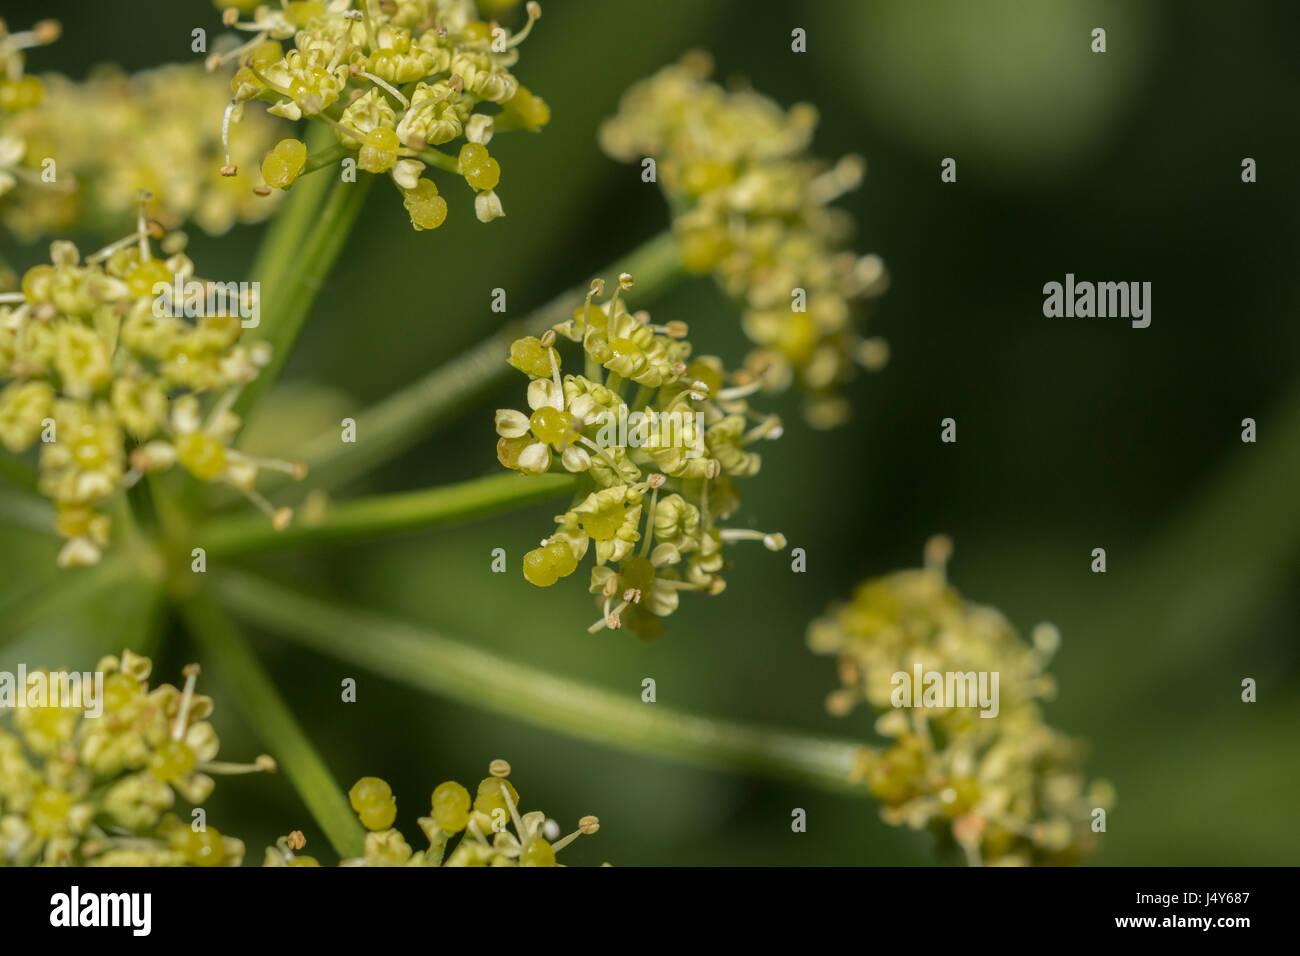 Flowers and flowerbuds of the Umbelliferous plant Alexanders / Smyrnium olusatrum - an edible foraged food, formerly cultivated as a vegetable. Stock Photo